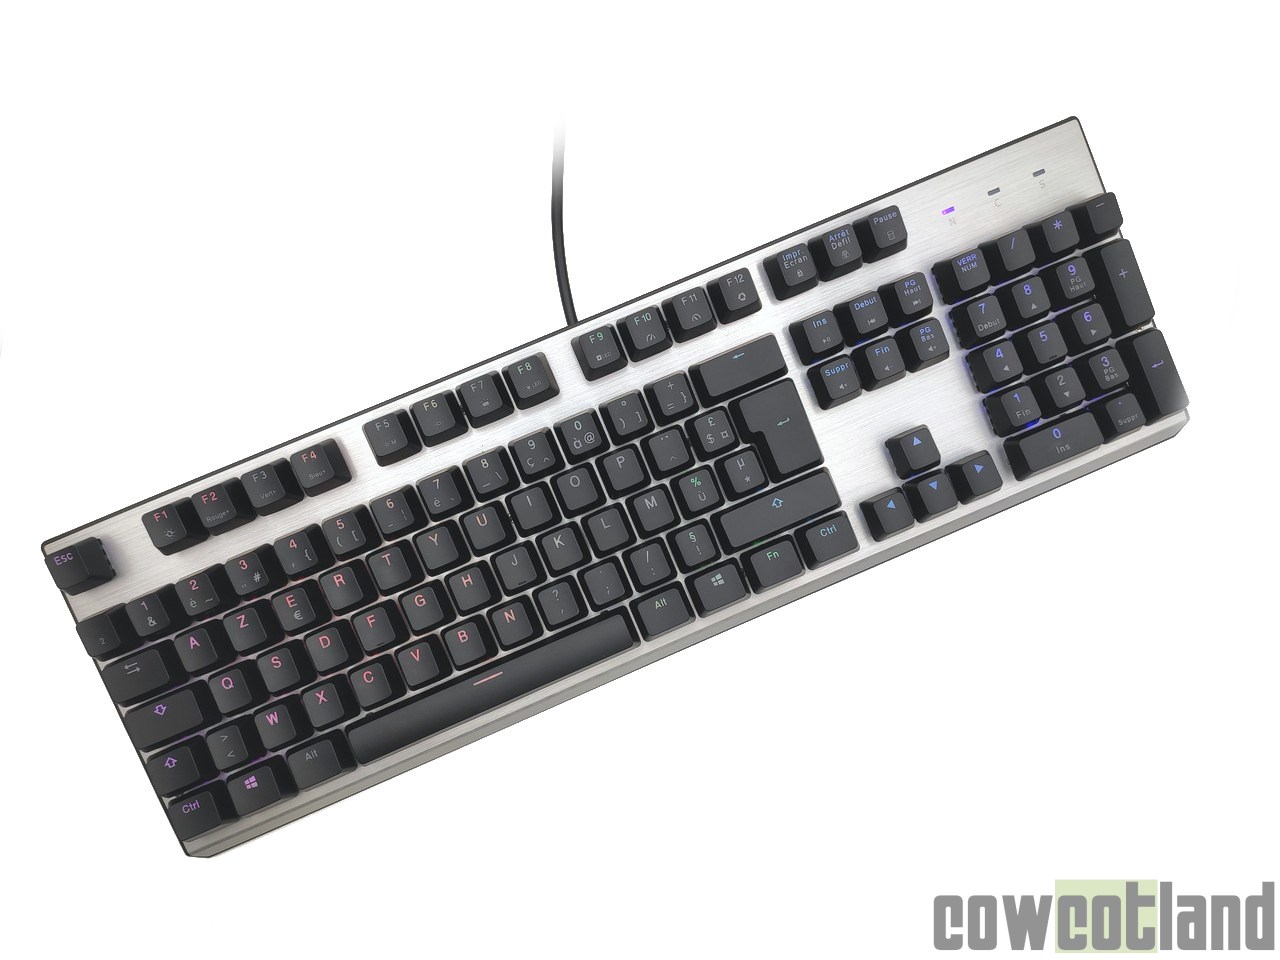 Image 46348, galerie Test clavier mcanique Cooler Master CK351 : switches optiques et hot-swappables !